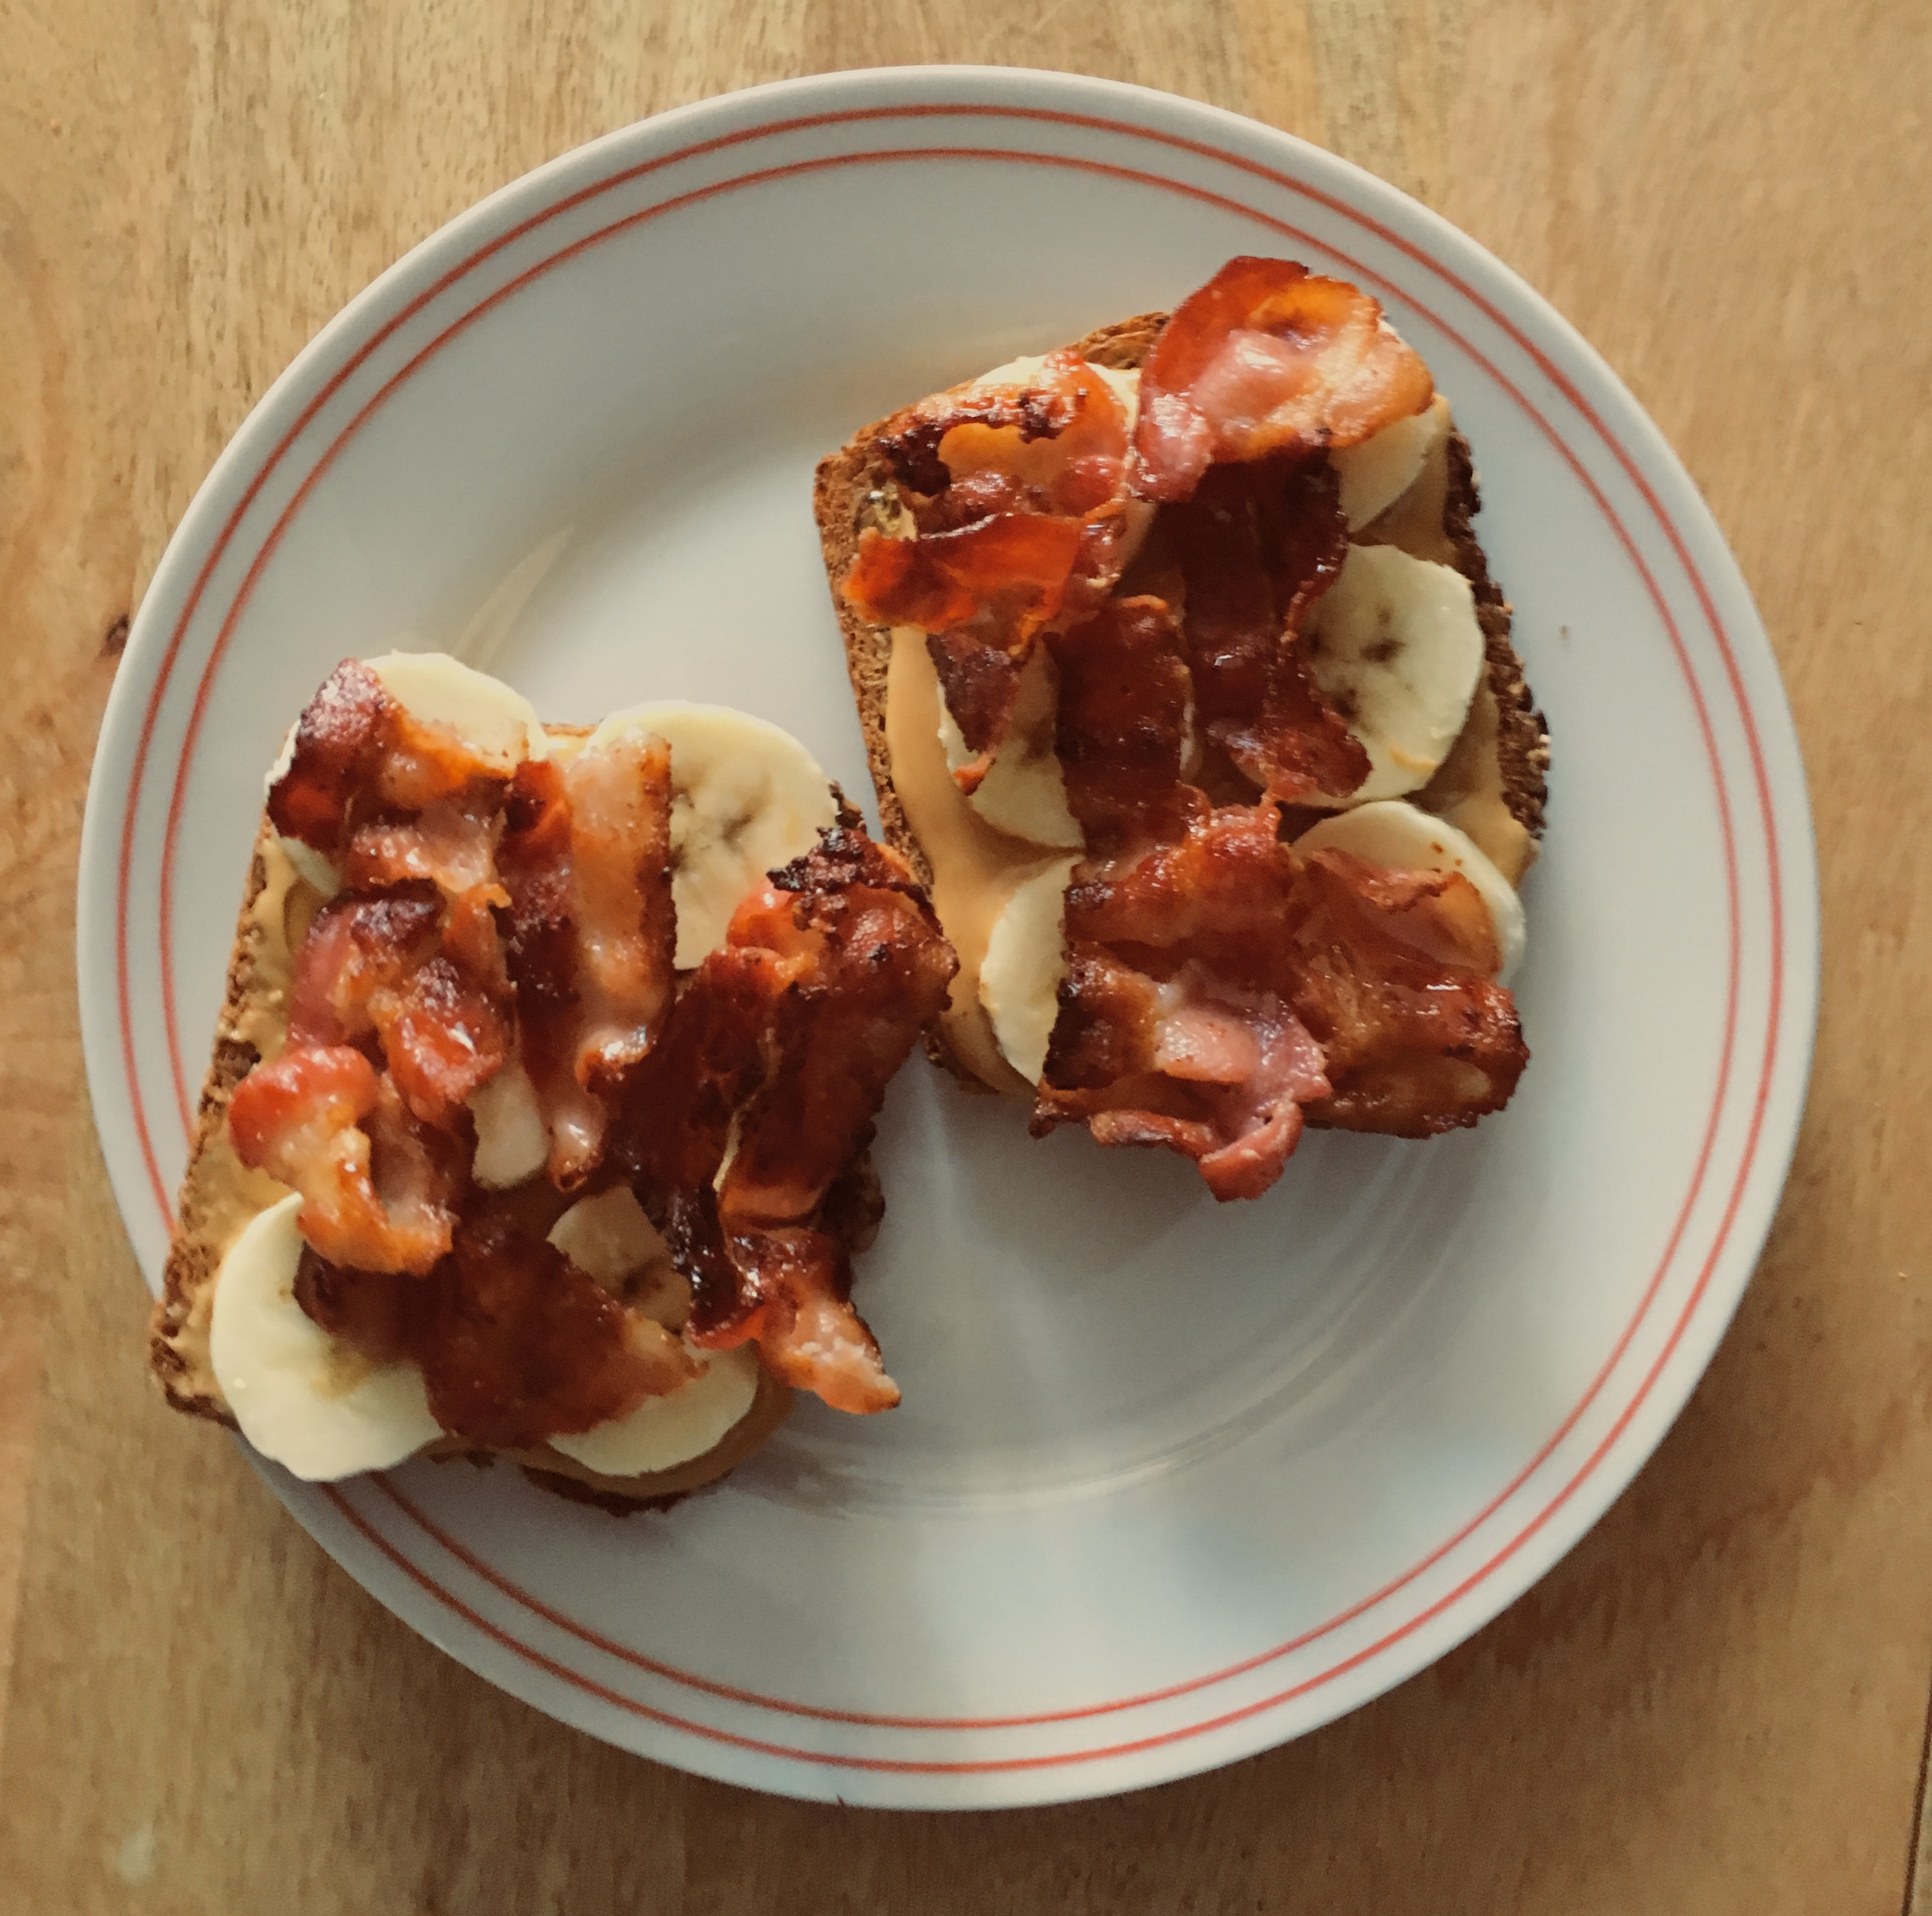 Toast with peanut butter, bacon, and banana